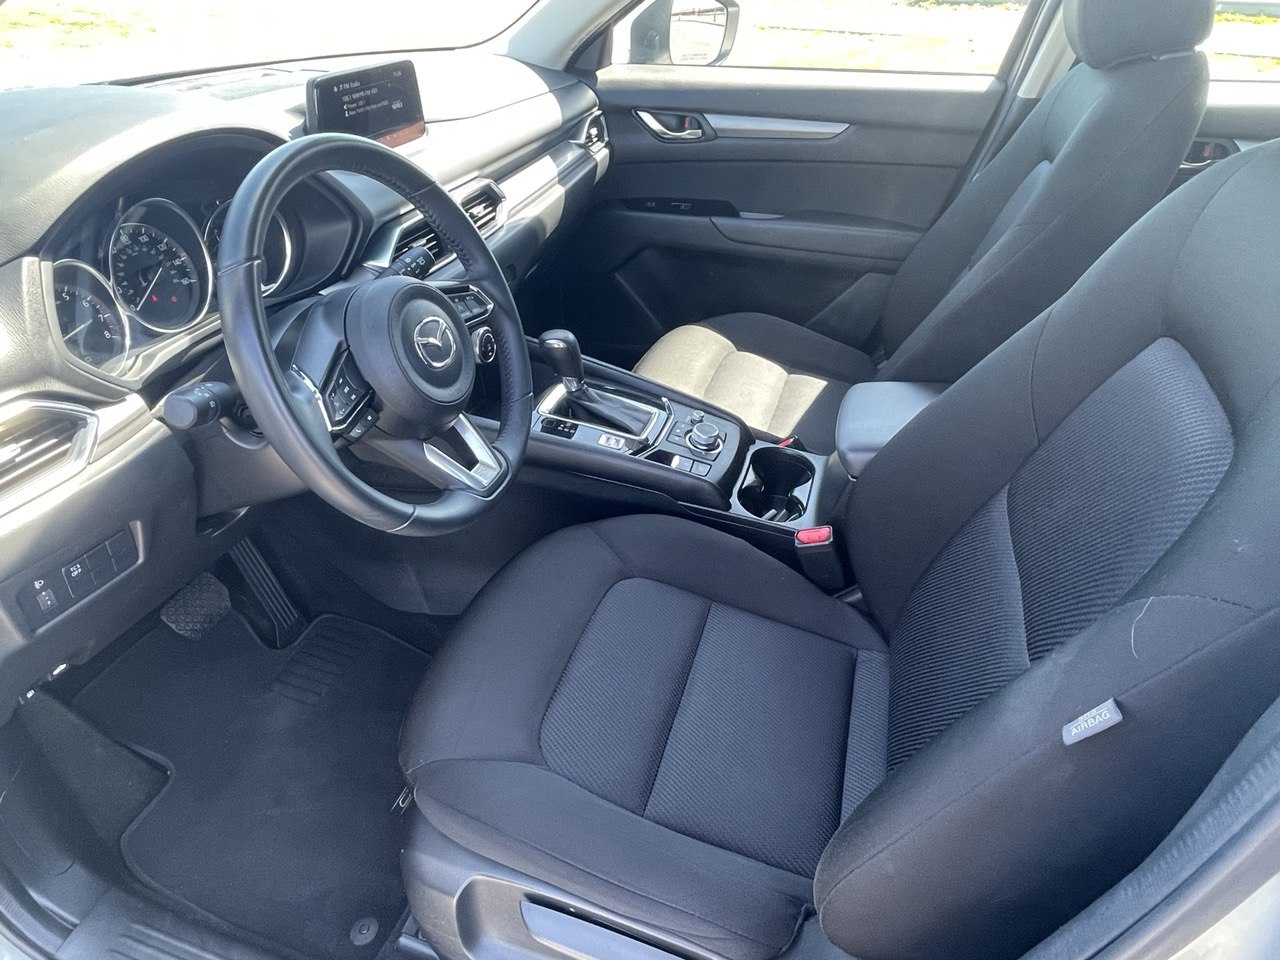 Used - Mazda CX-5 Sport AWD SUV for sale in Staten Island NY